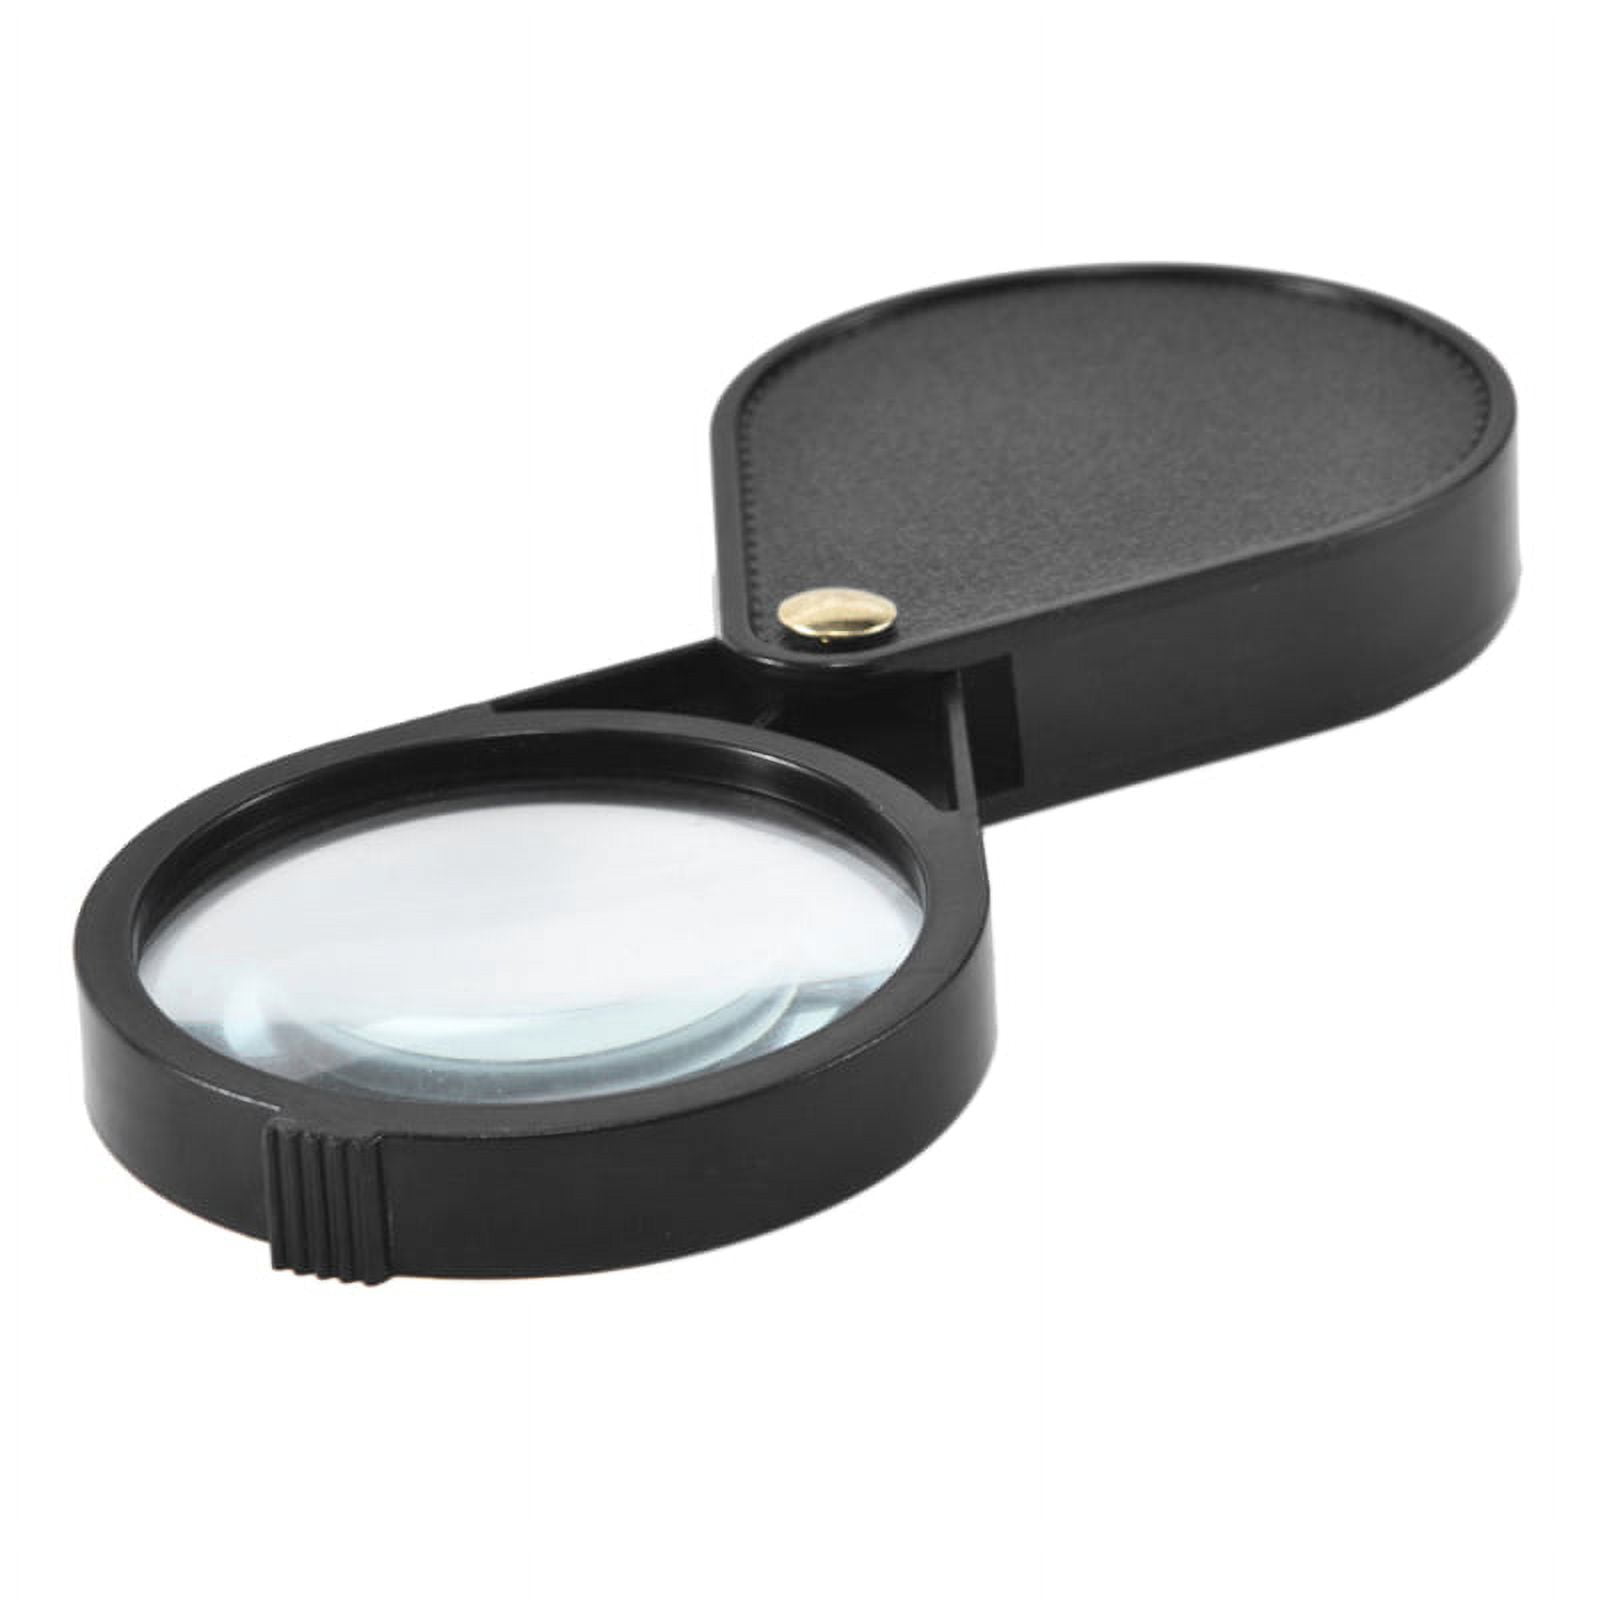 VILLCASE 1 Set Jewelry Magnifying Glass Desktop Magnifier for Gems Loupe  Portable Gems Microscope Coin Magnifier with Light Jewelers Tools Folding  Map